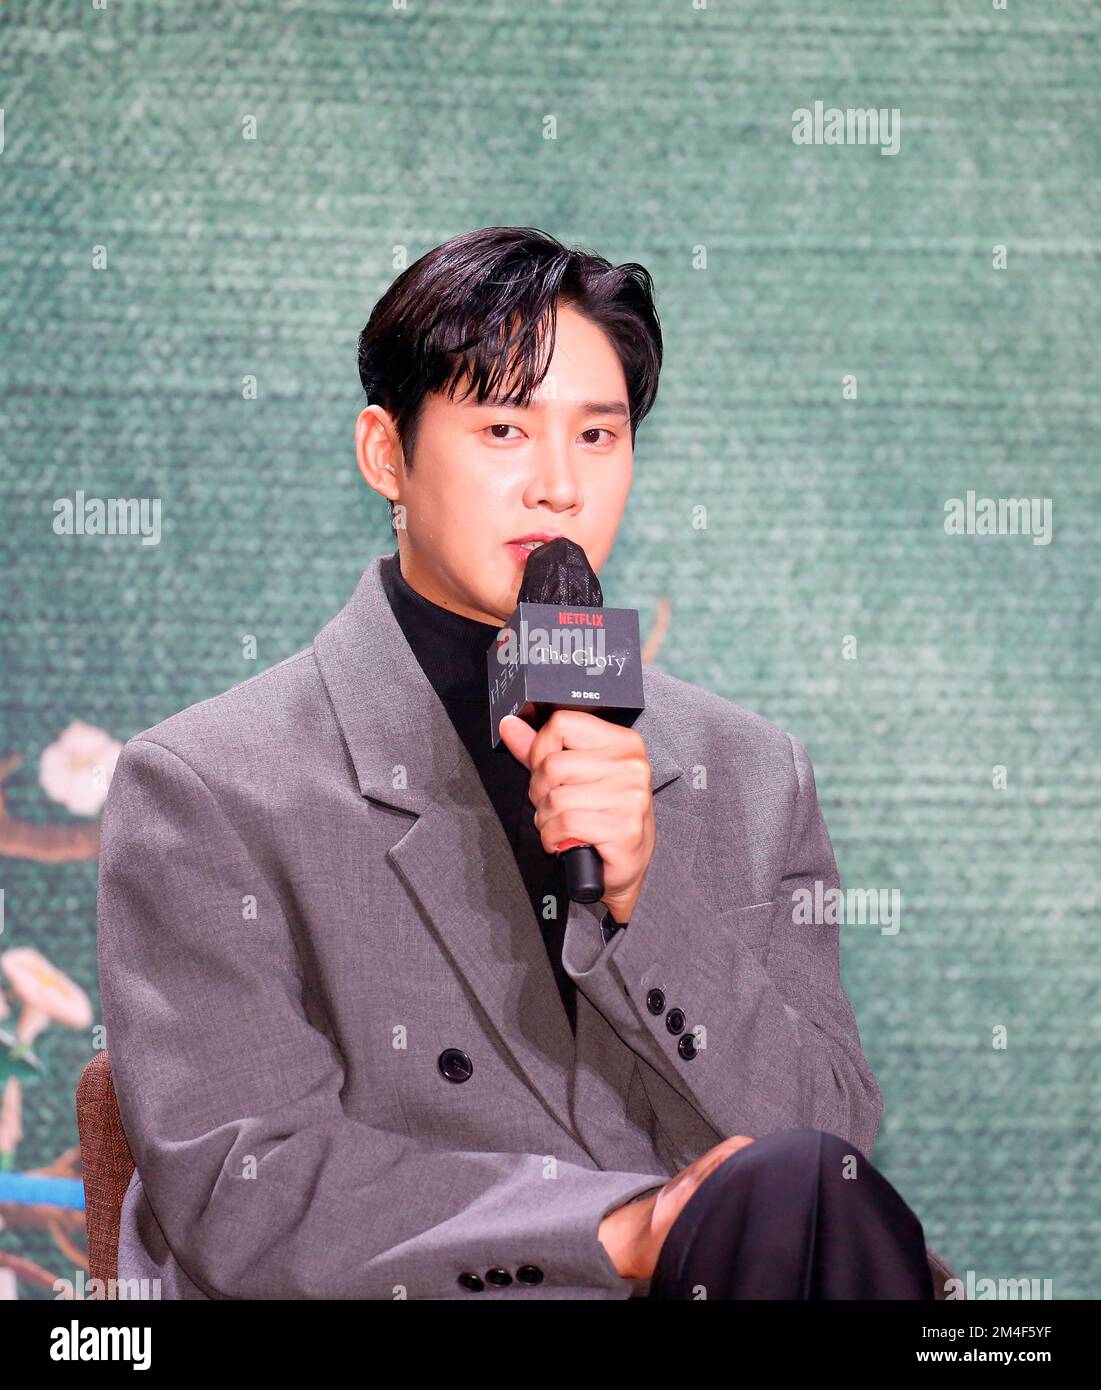 Park Sung-Hoon, Dec 20, 2022 : Actor Park Sung-Hoon attends a press  conference for Netflix series "The Glory" in Seoul, South Korea. "The  Glory" is a grim revenge drama involving bullying at